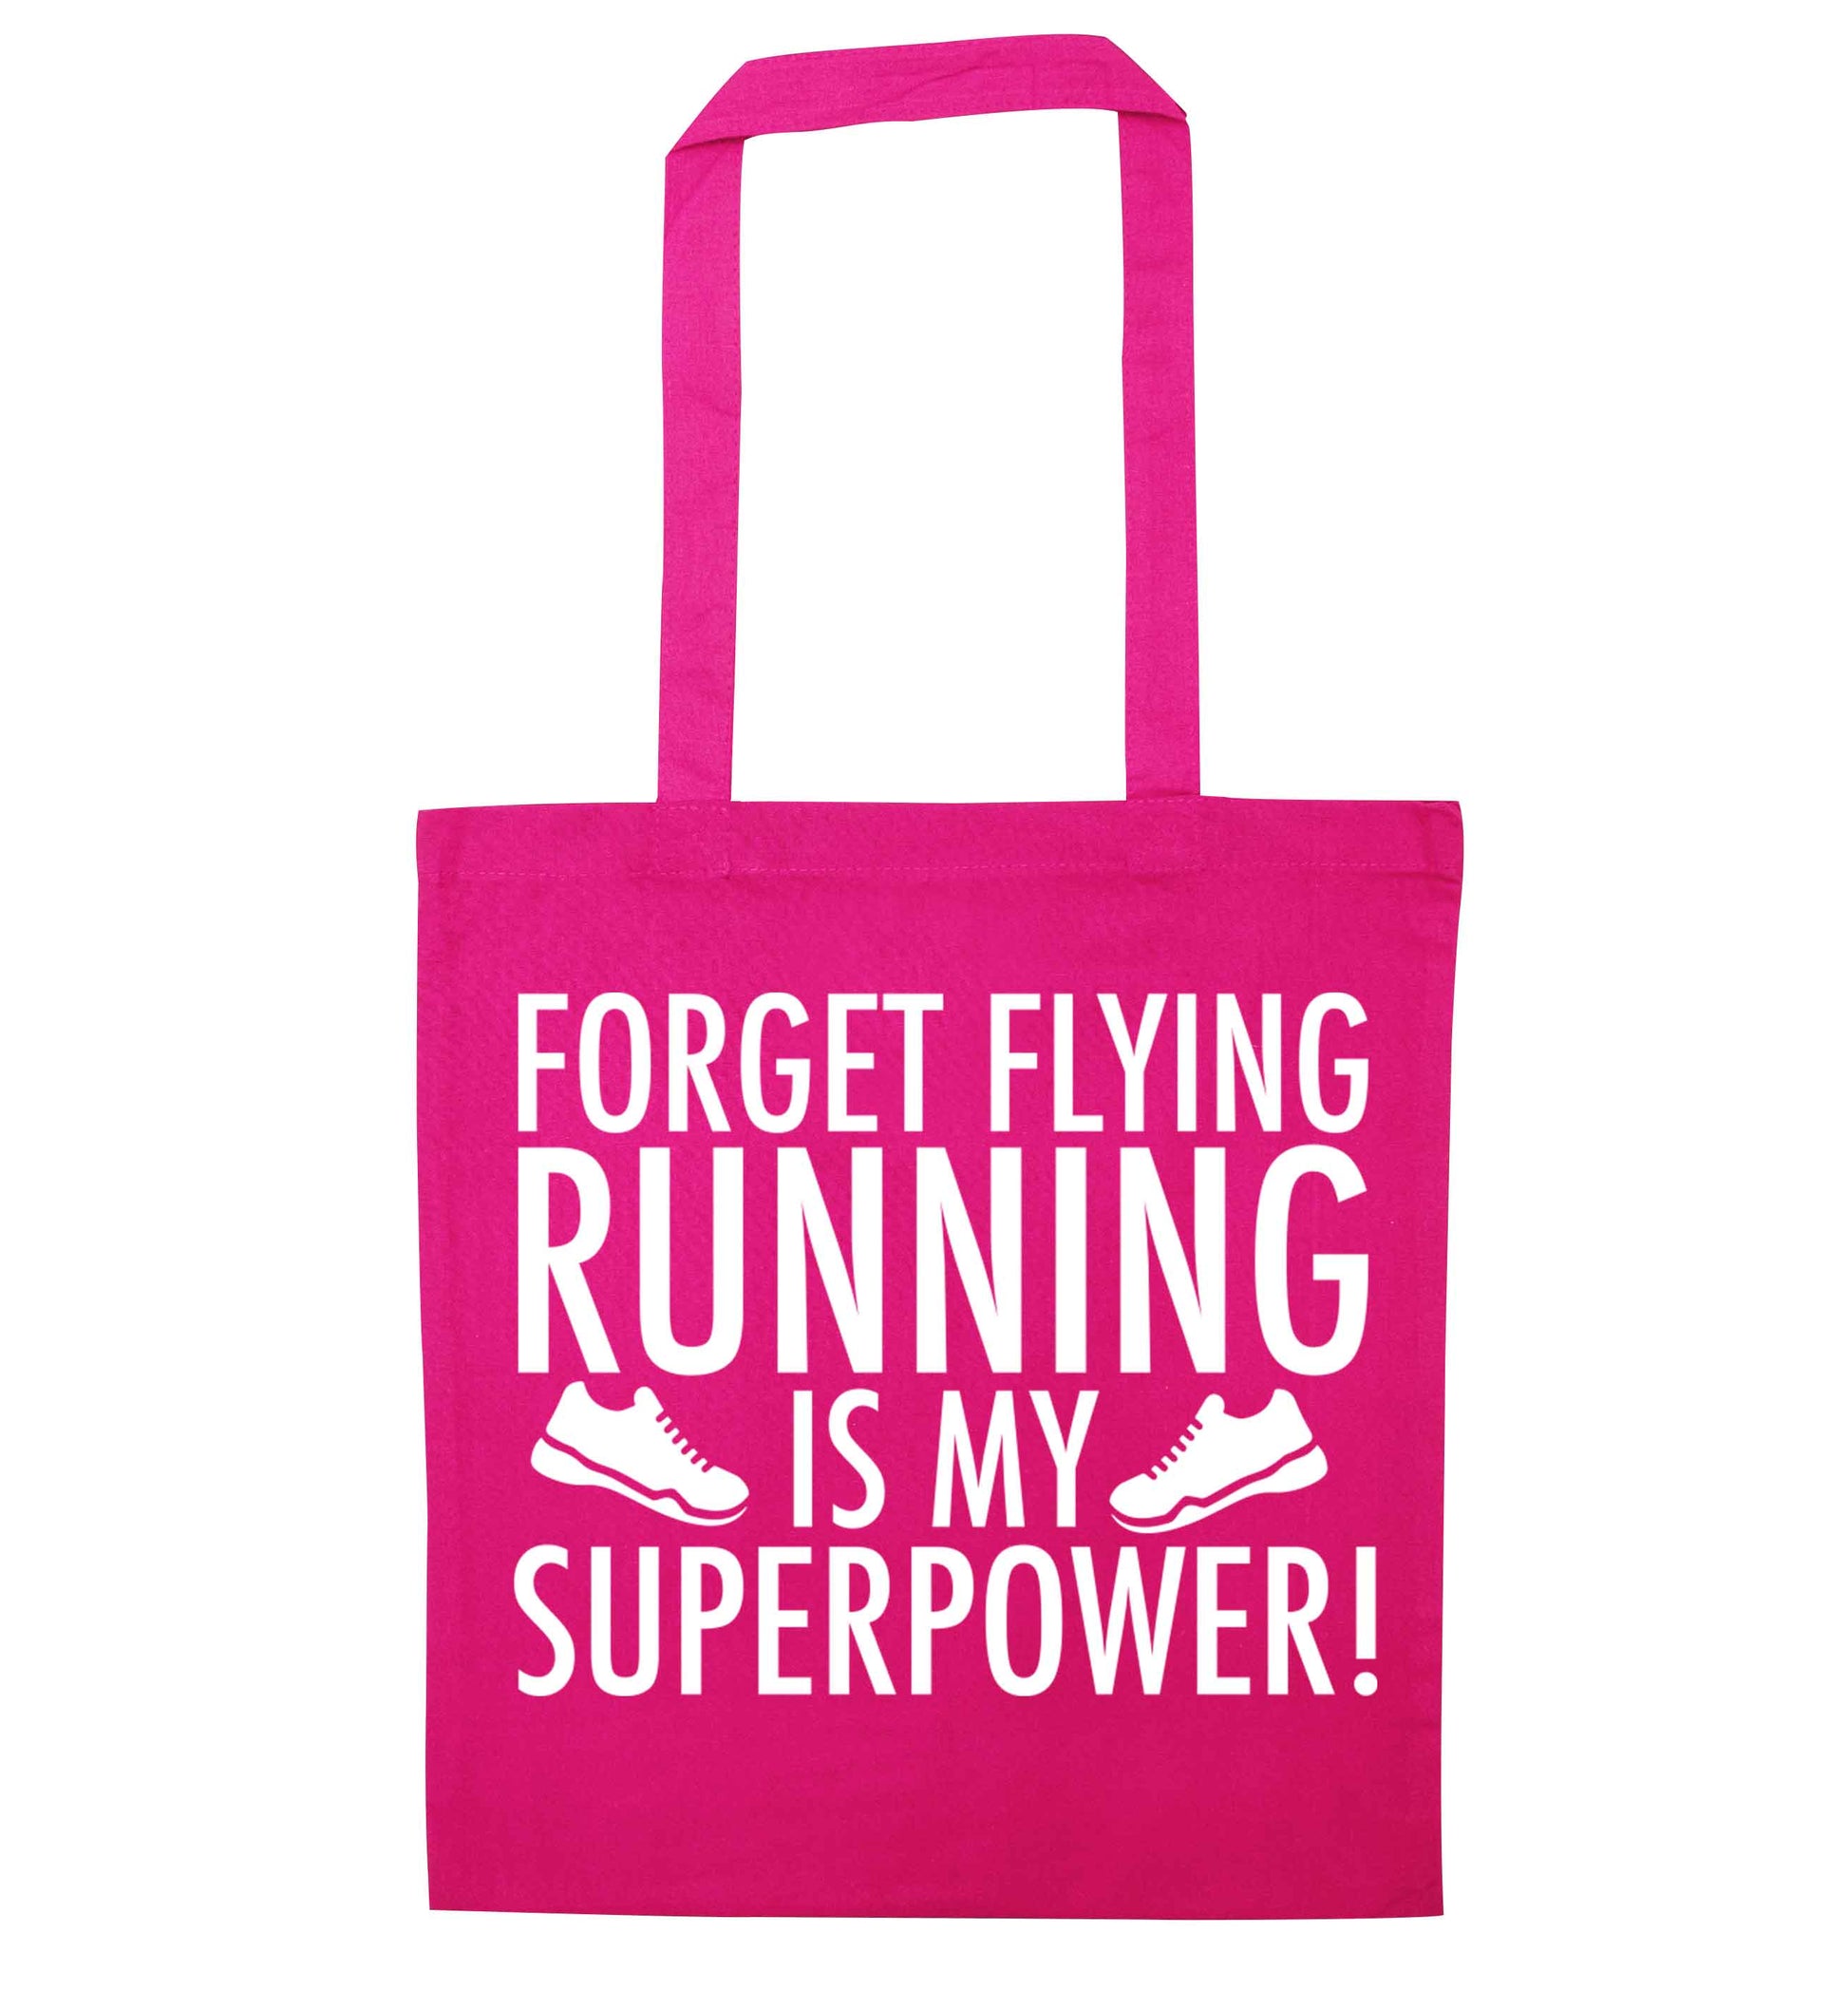 Crazy running dude pink tote bag